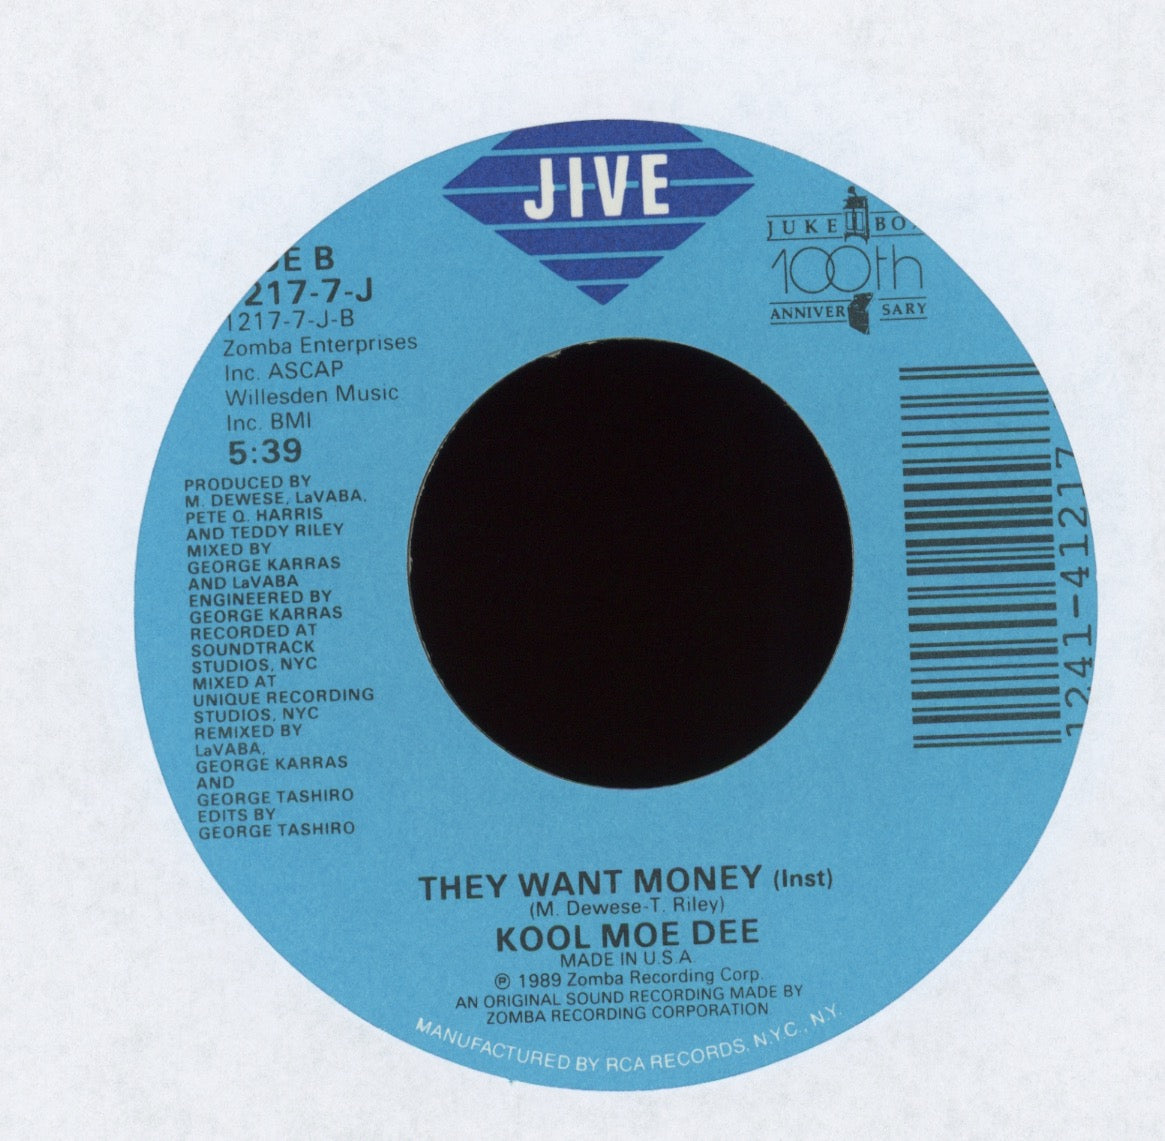 Kool Moe Dee - They Want Money on Jive With Picture Sleeve